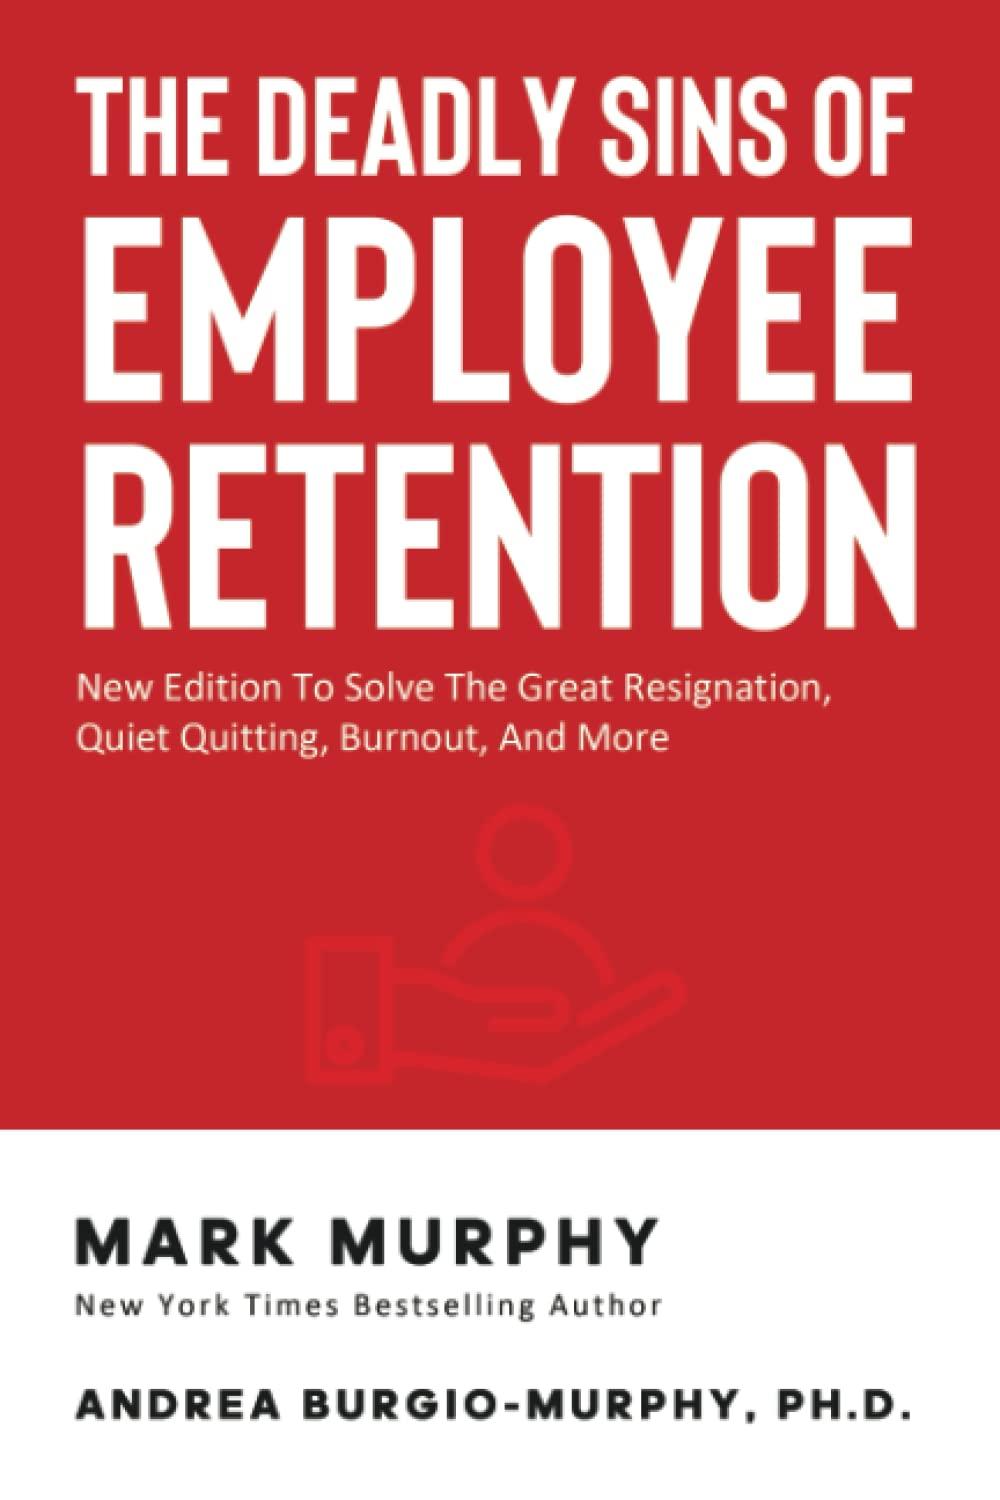 The Deadly Sins Of Employee Retention New Edition To Solve The Great Resignation Quiet Quitting Burnout And More